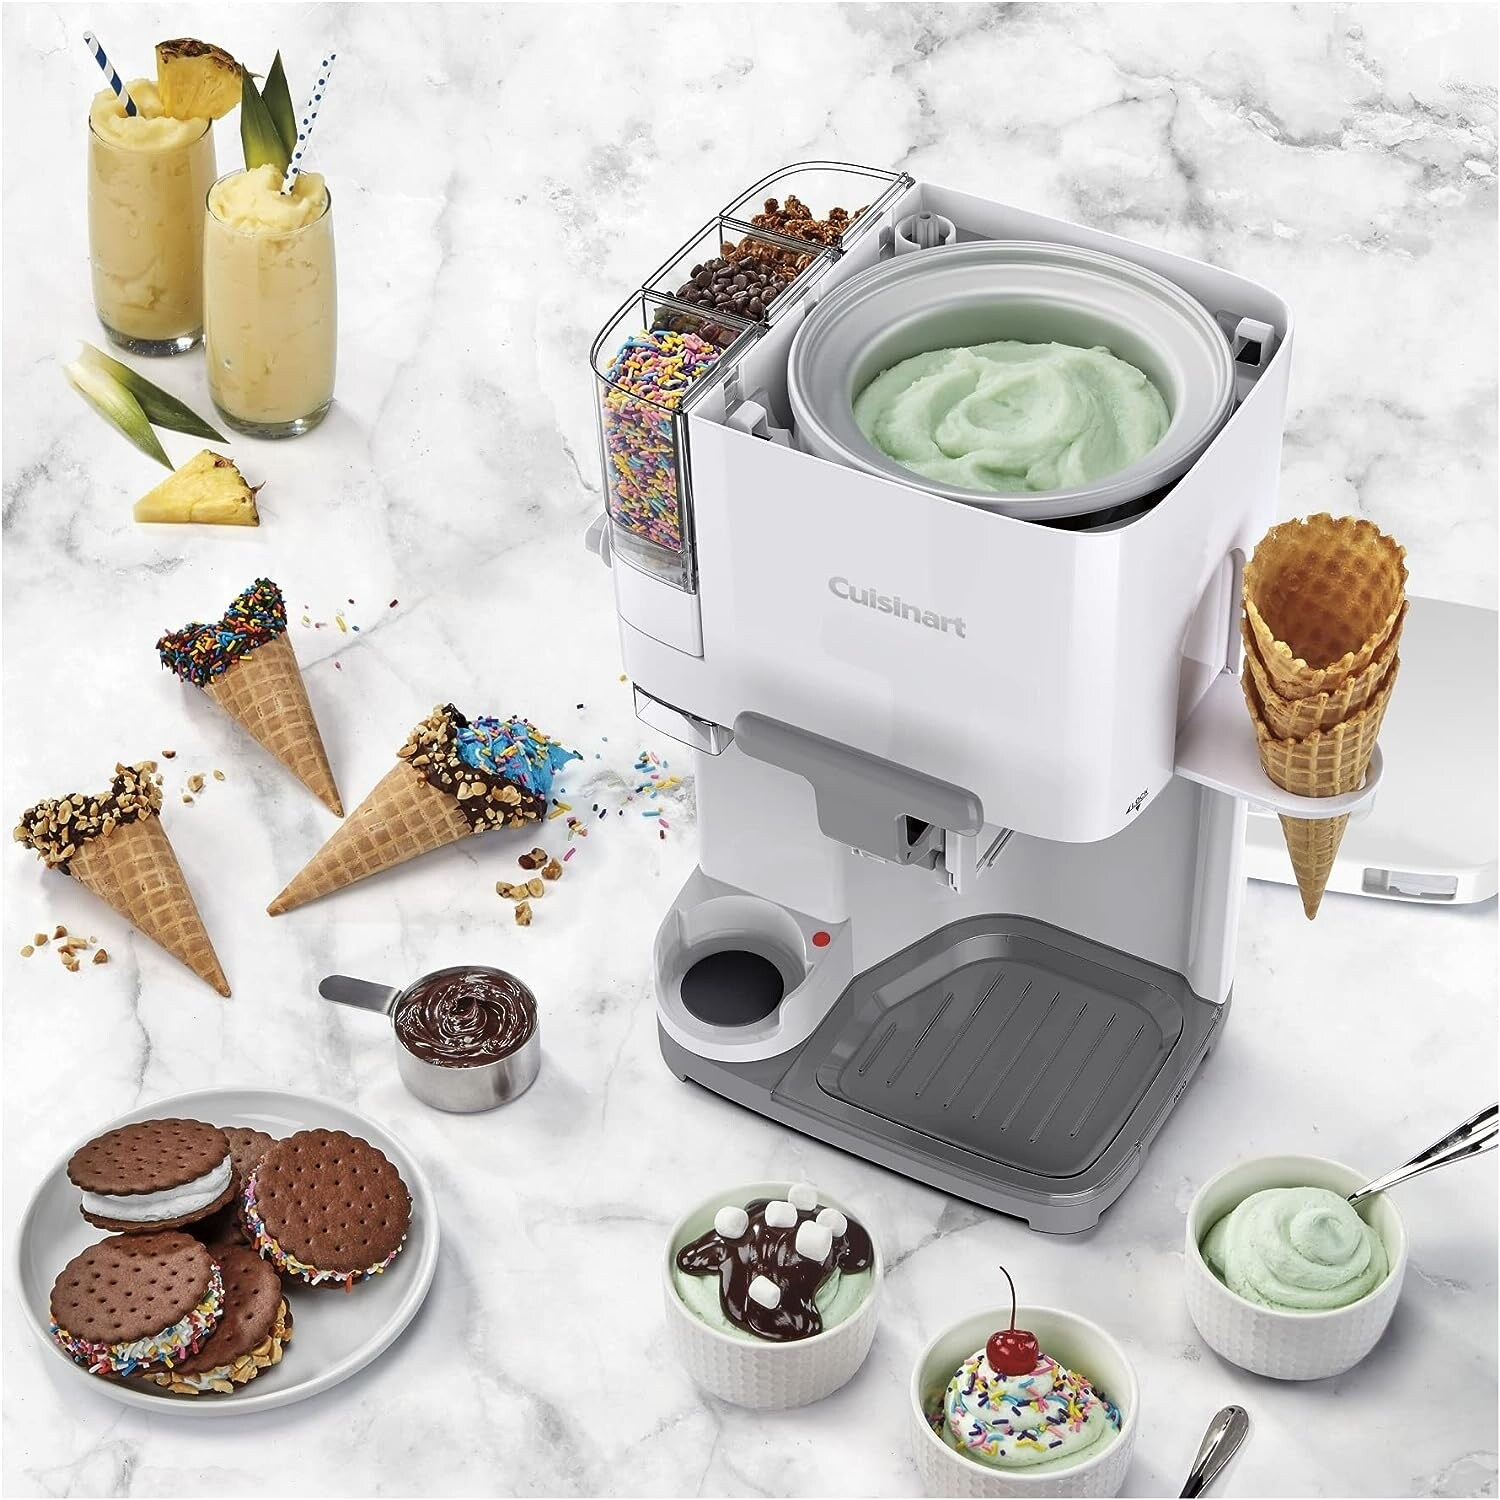 https://ak1.ostkcdn.com/images/products/is/images/direct/46b6546be52534d3ee1ef5f2be2b83b74d1f819c/Cuisinart-ICE-48-Soft-Serve-Ice-Cream-Machine%2C-White.jpg